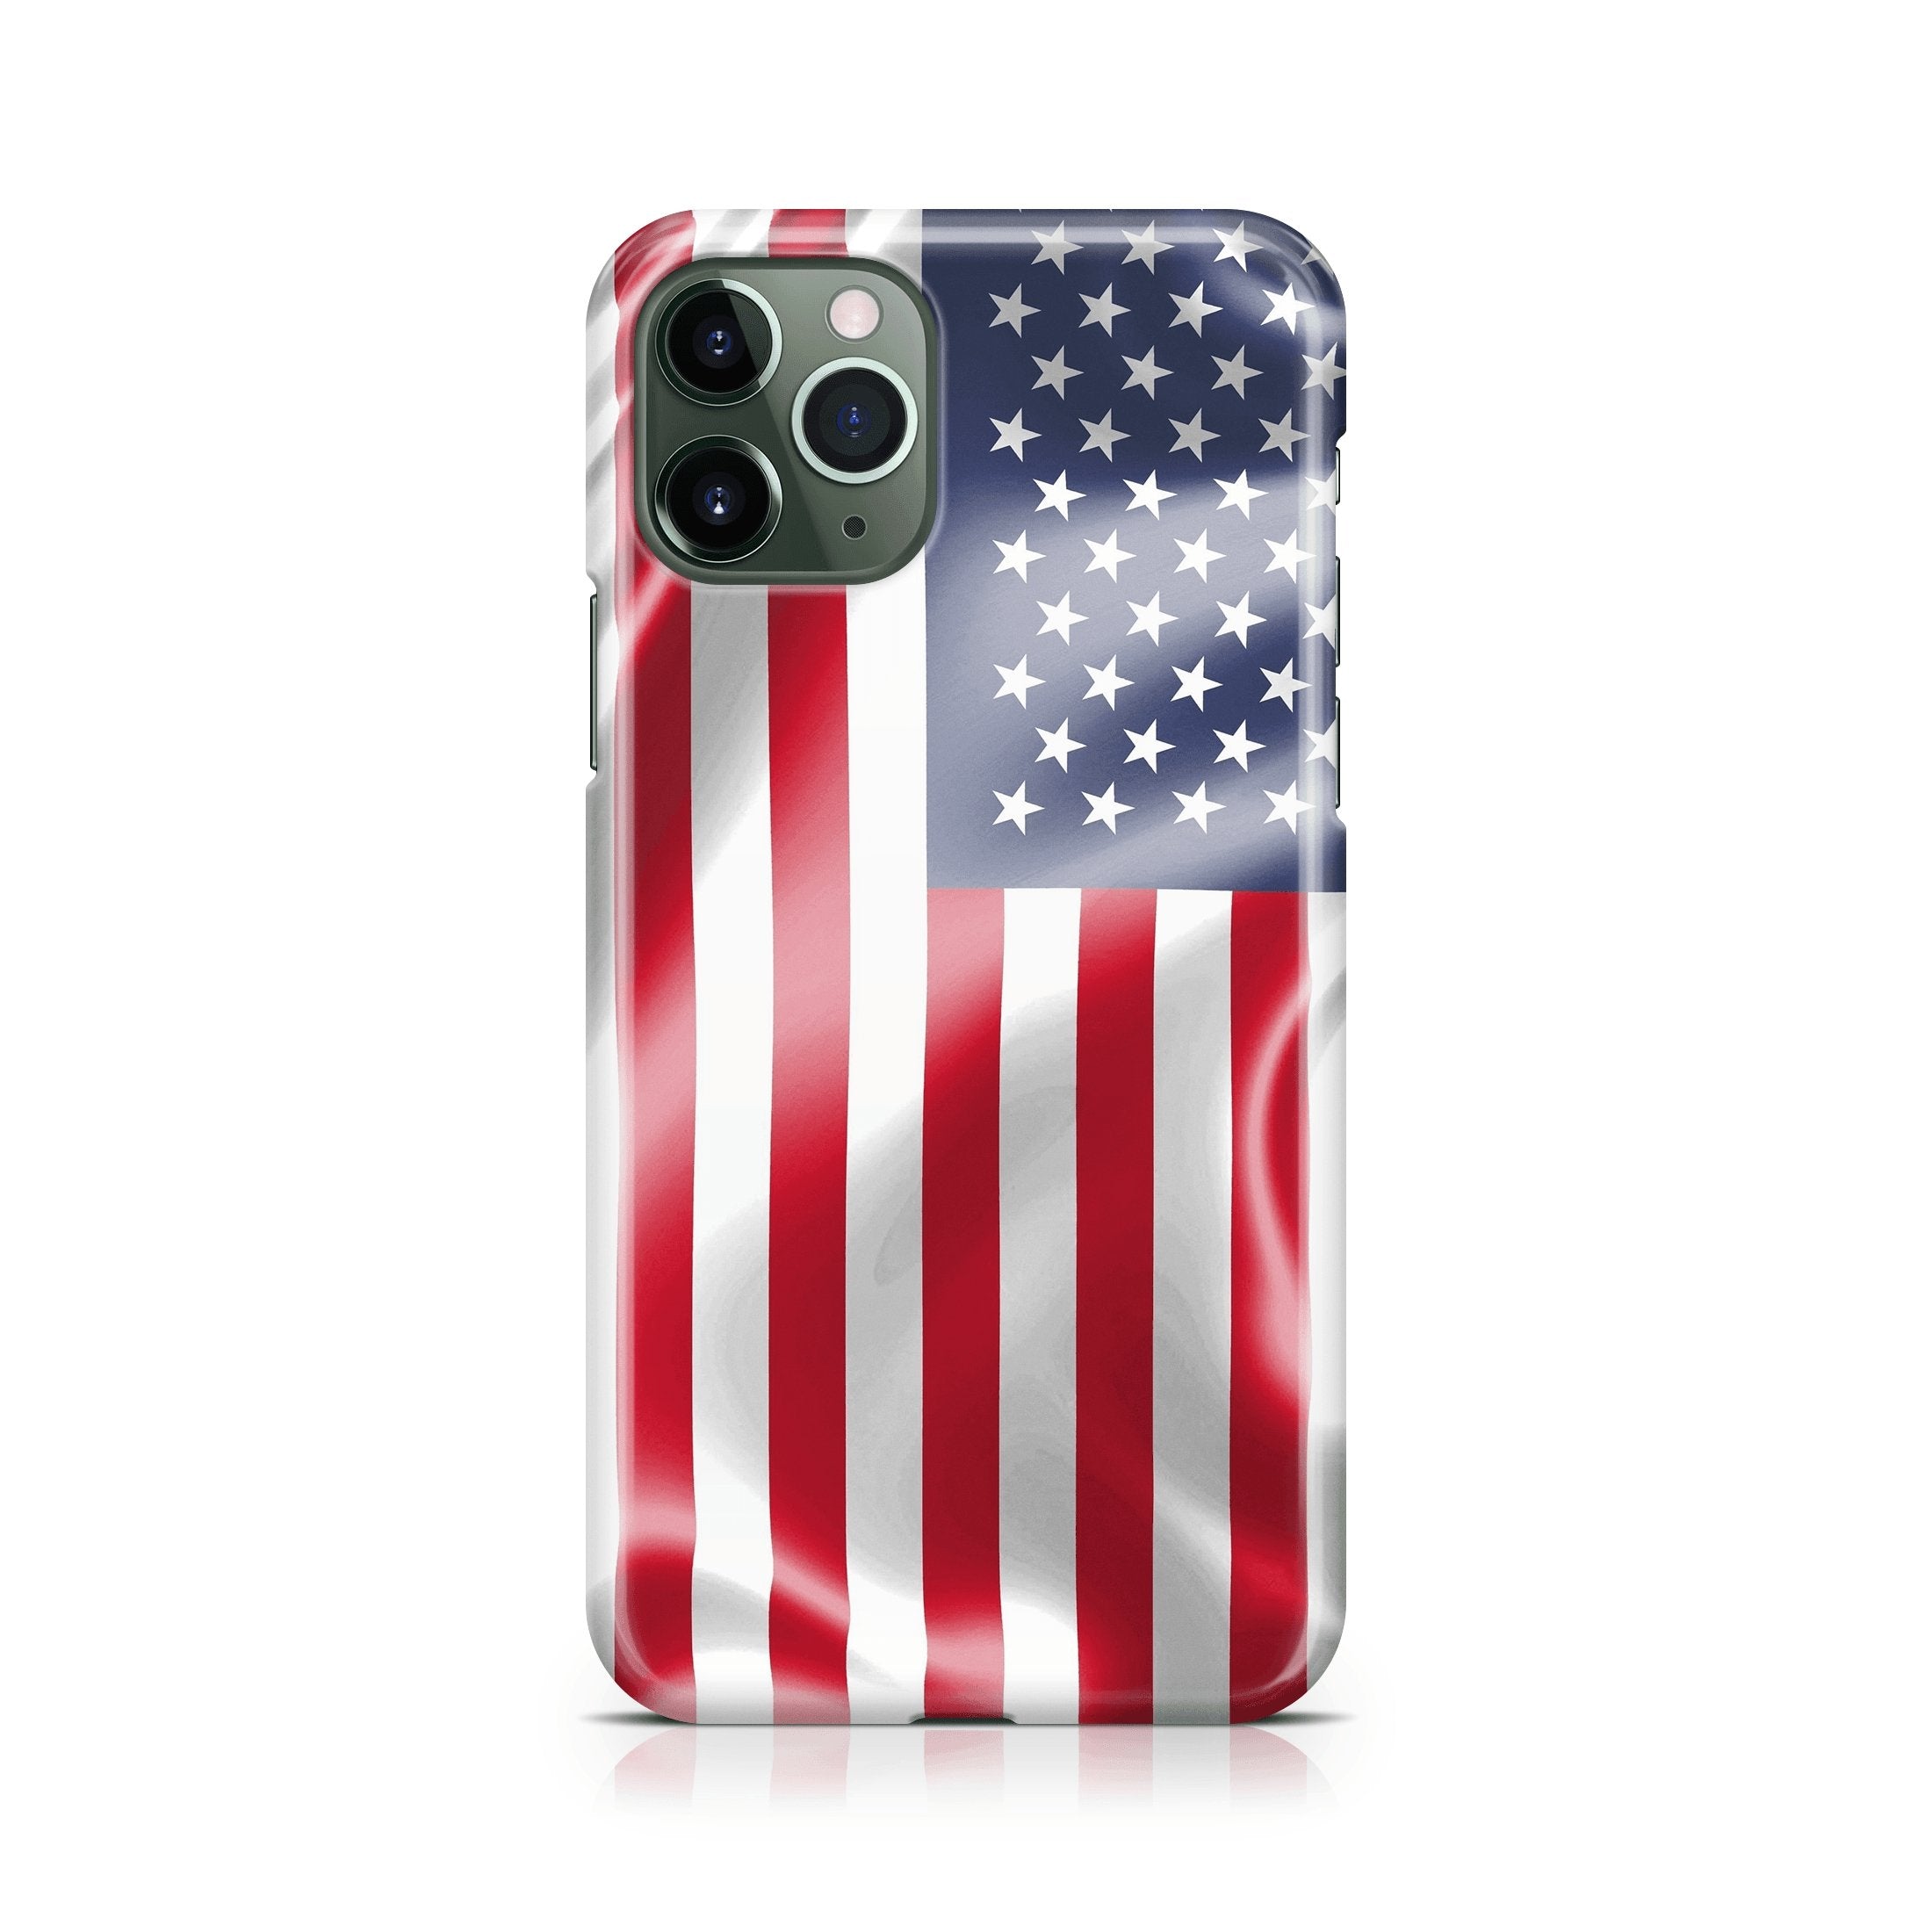 Waving American Flag - iPhone phone case designs by CaseSwagger